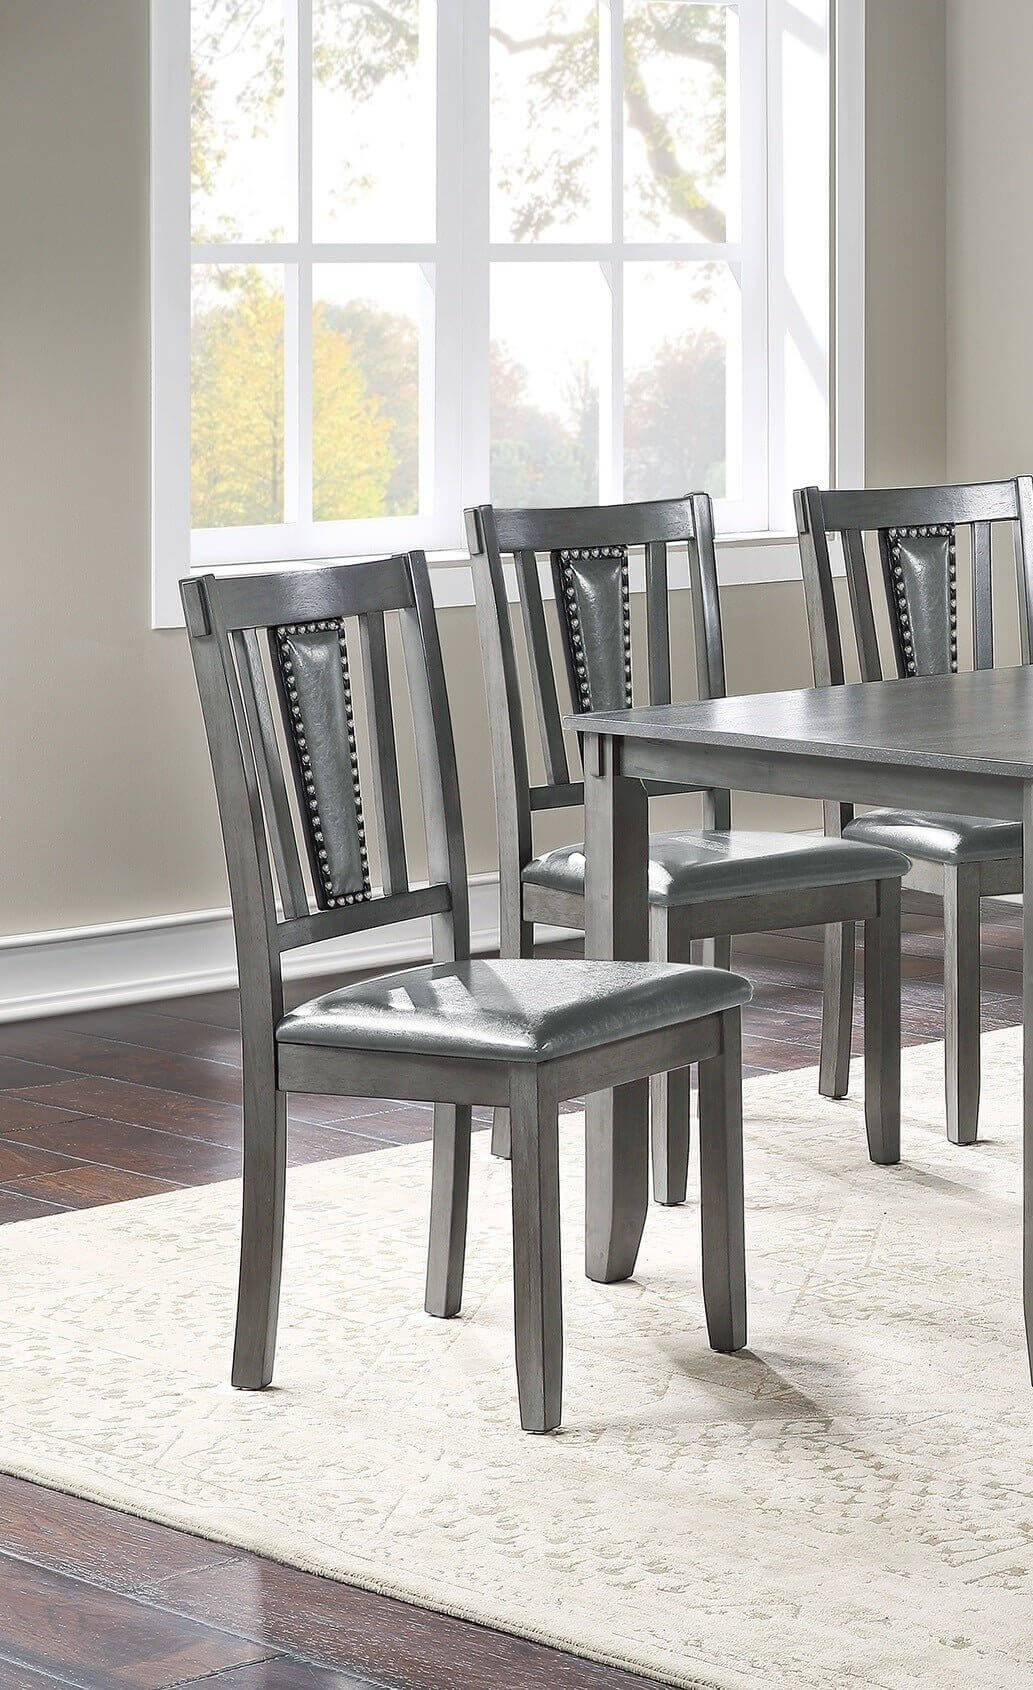 6pc Set Dining Table Set; 4x Side Chairs with Bench, Gray Color